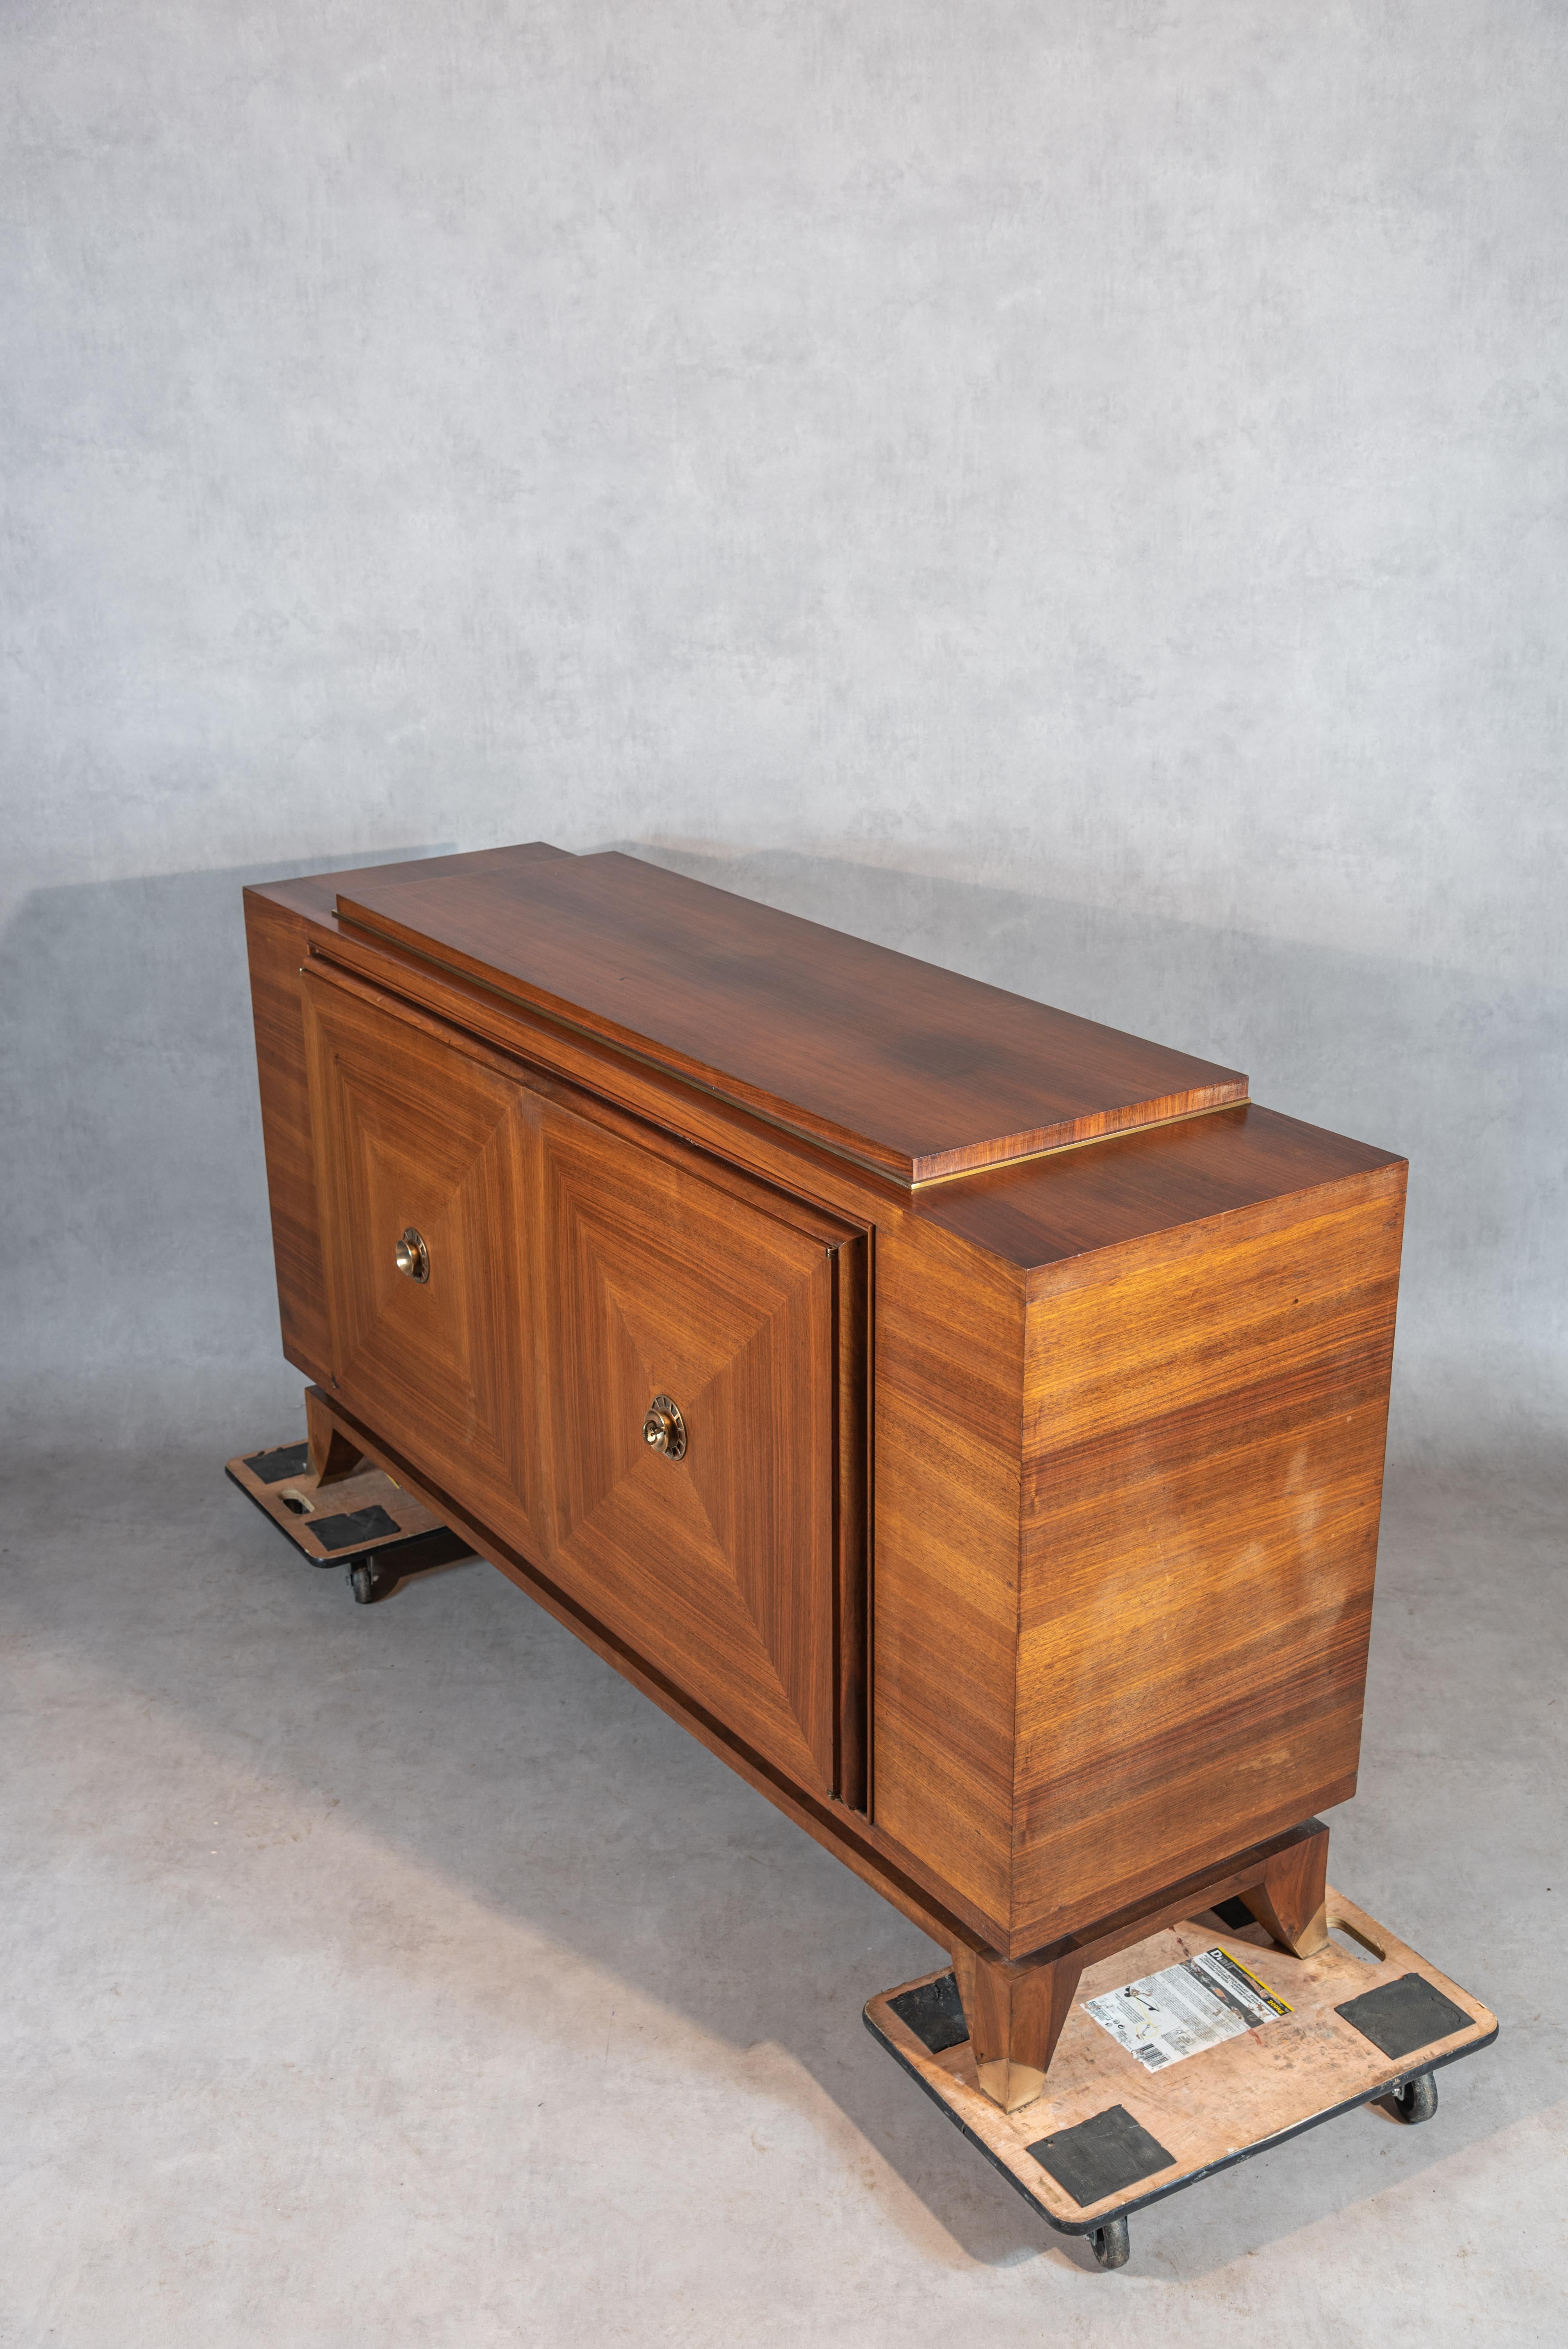 Experience the exceptional beauty and craftsmanship of this midcentury French Art Deco Enfilade, inspired by the renowned Jules Leleu. Crafted from rich mahogany veneer, this Enfilade boasts squared book match motifs and refined craftsmanship,